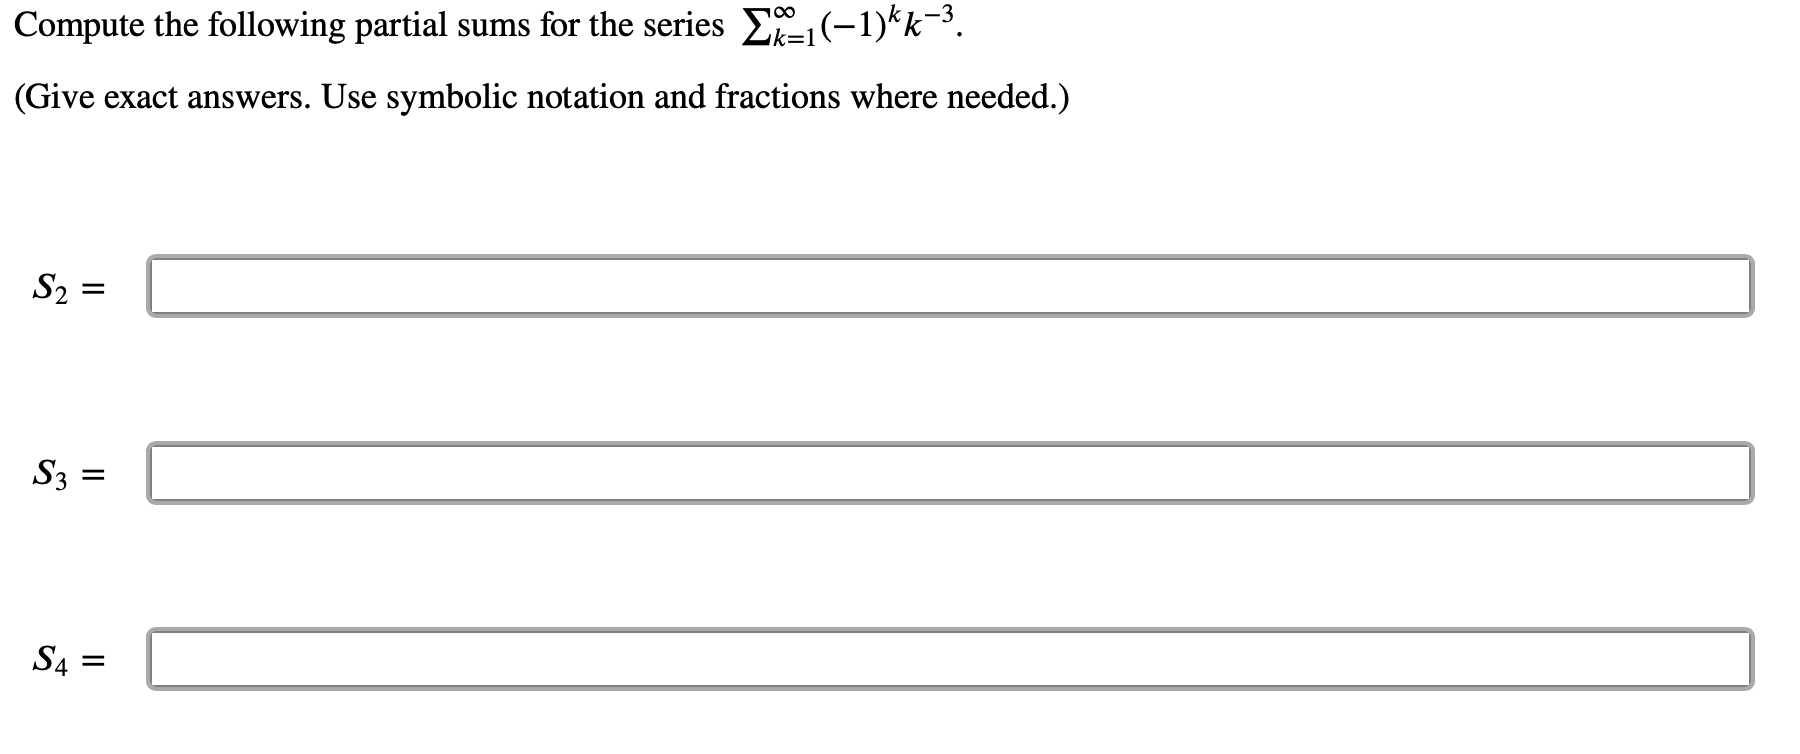 Compute the following partial sums for the series E(-1)*k-3.
(Give exact answers. Use symbolic notation and fractions where needed.)
S2 =
S3 =
S4 :
II
